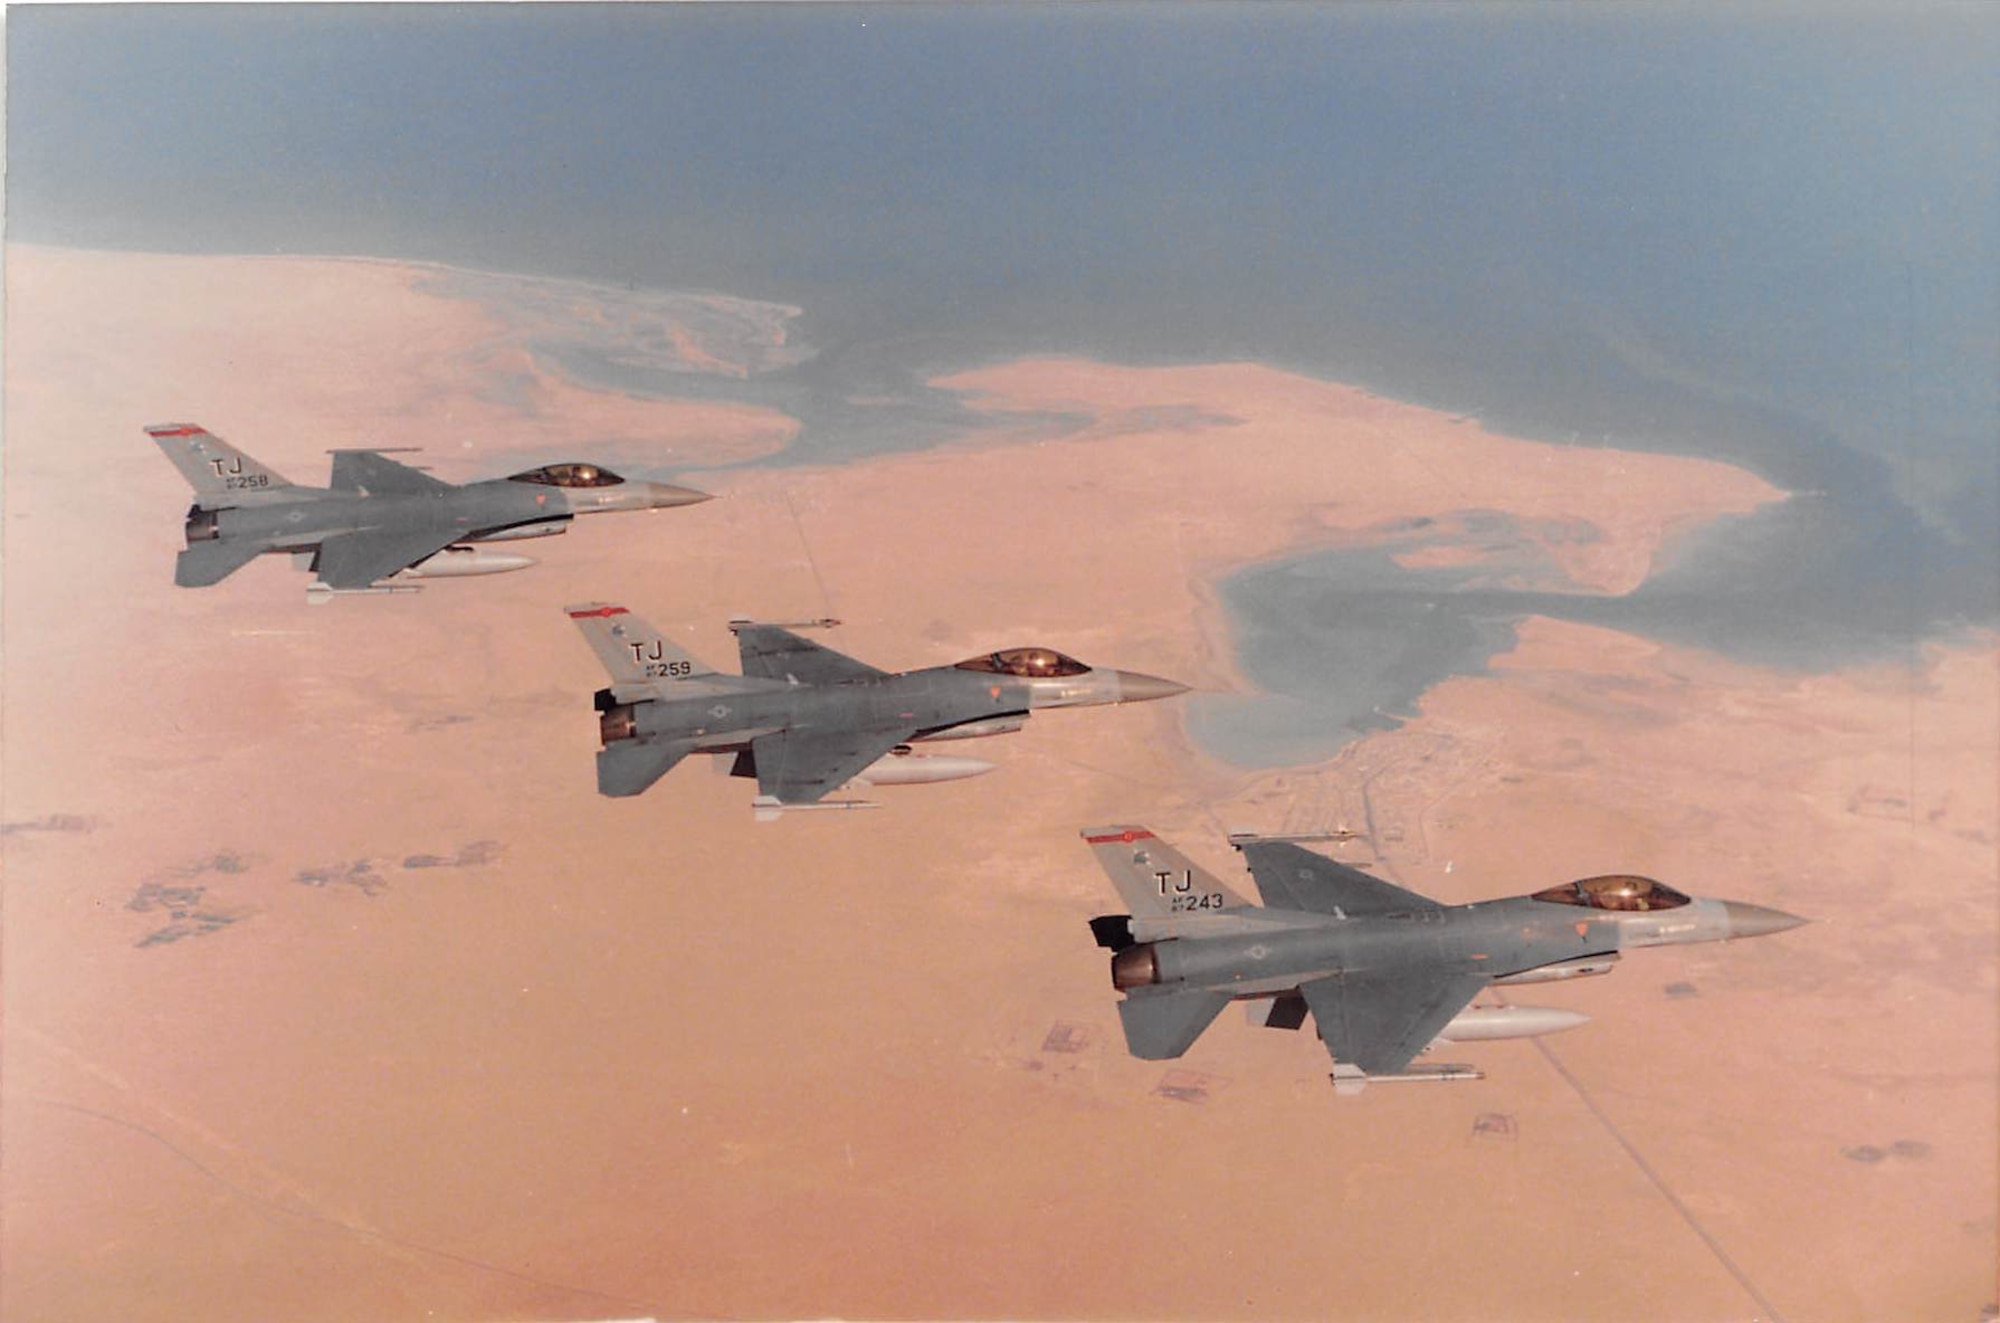 Col. Bruce “Baghdad” Cox, 307th Bomb Wing commander, Barksdale Air Force Base, La., flies his F-16 Fighting Falcon in formation with two other jets in Southwest Asia during operations Desert Shield and Desert Storm. Cox flew in the first daylight raid over Baghdad in January 1991 and was assigned here to the 457th Fighter Squadron after the conflict. (U.S. Air Force photo courtesy of Col. Bruce Cox)